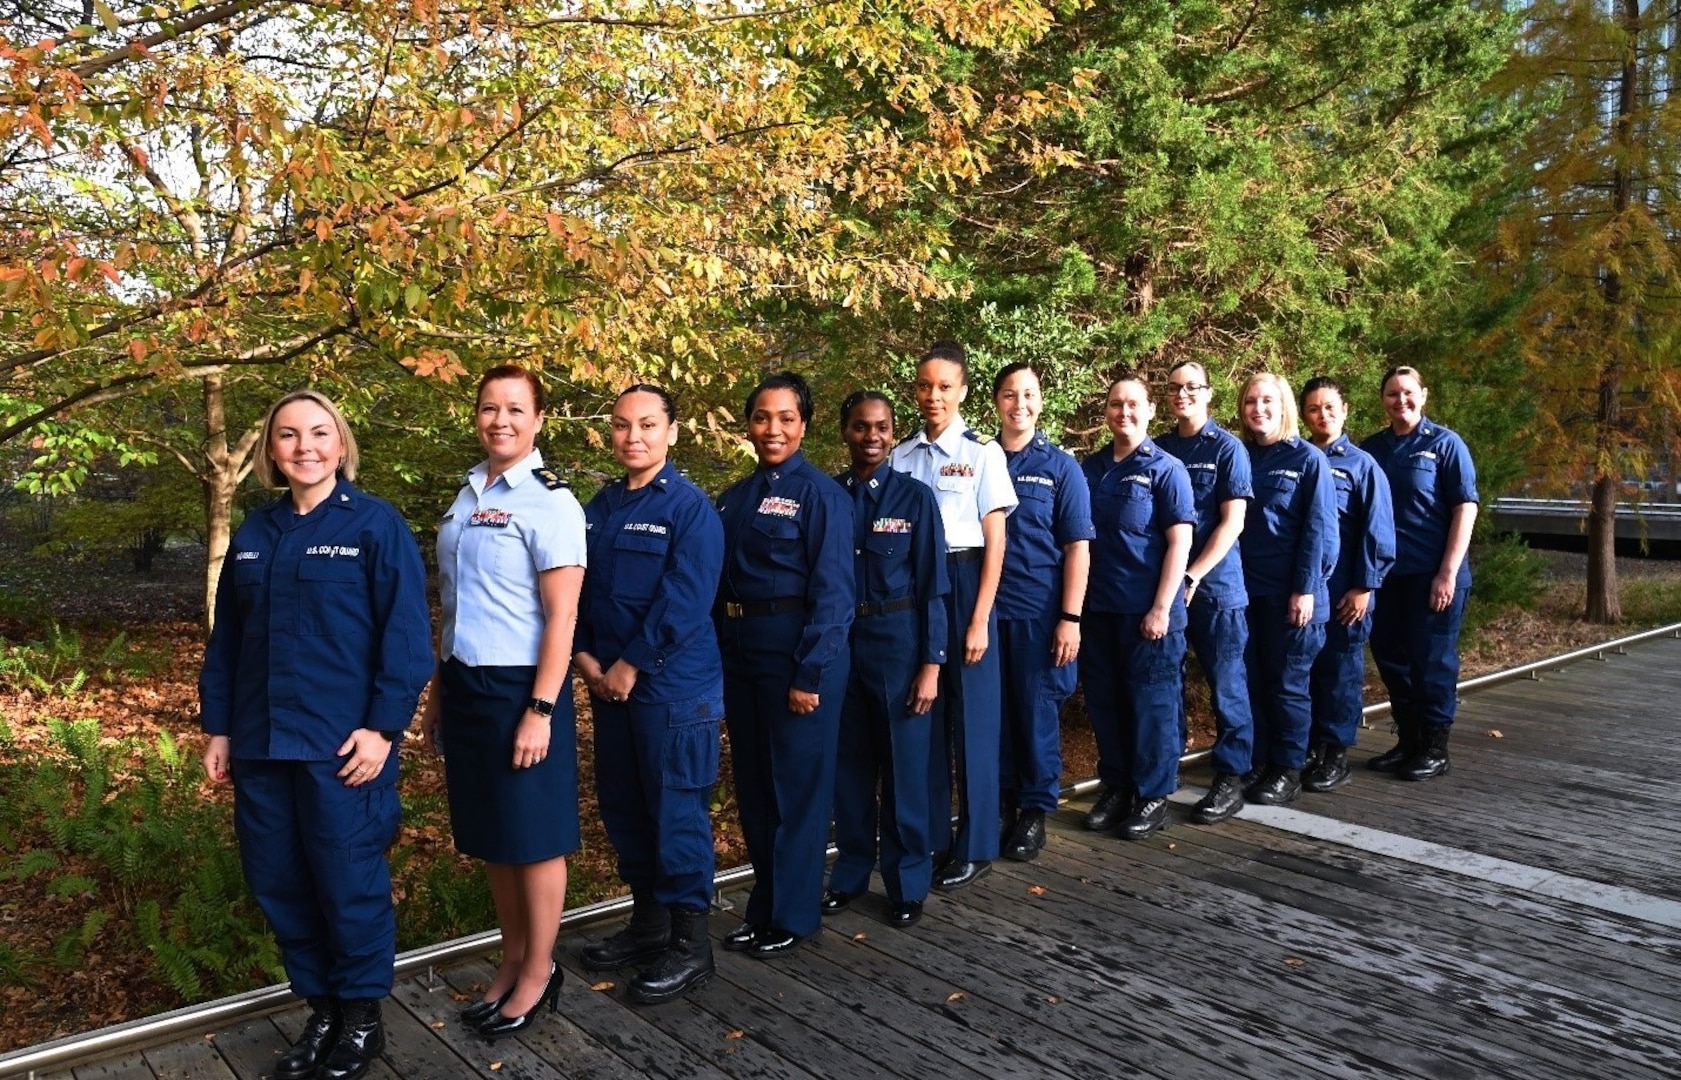 Women assigned to various directorates at Coast Guard Headquarters demonstrate different uniforms and hairstyles now available to be worn, Sep. 1, 2021. USCG photo.